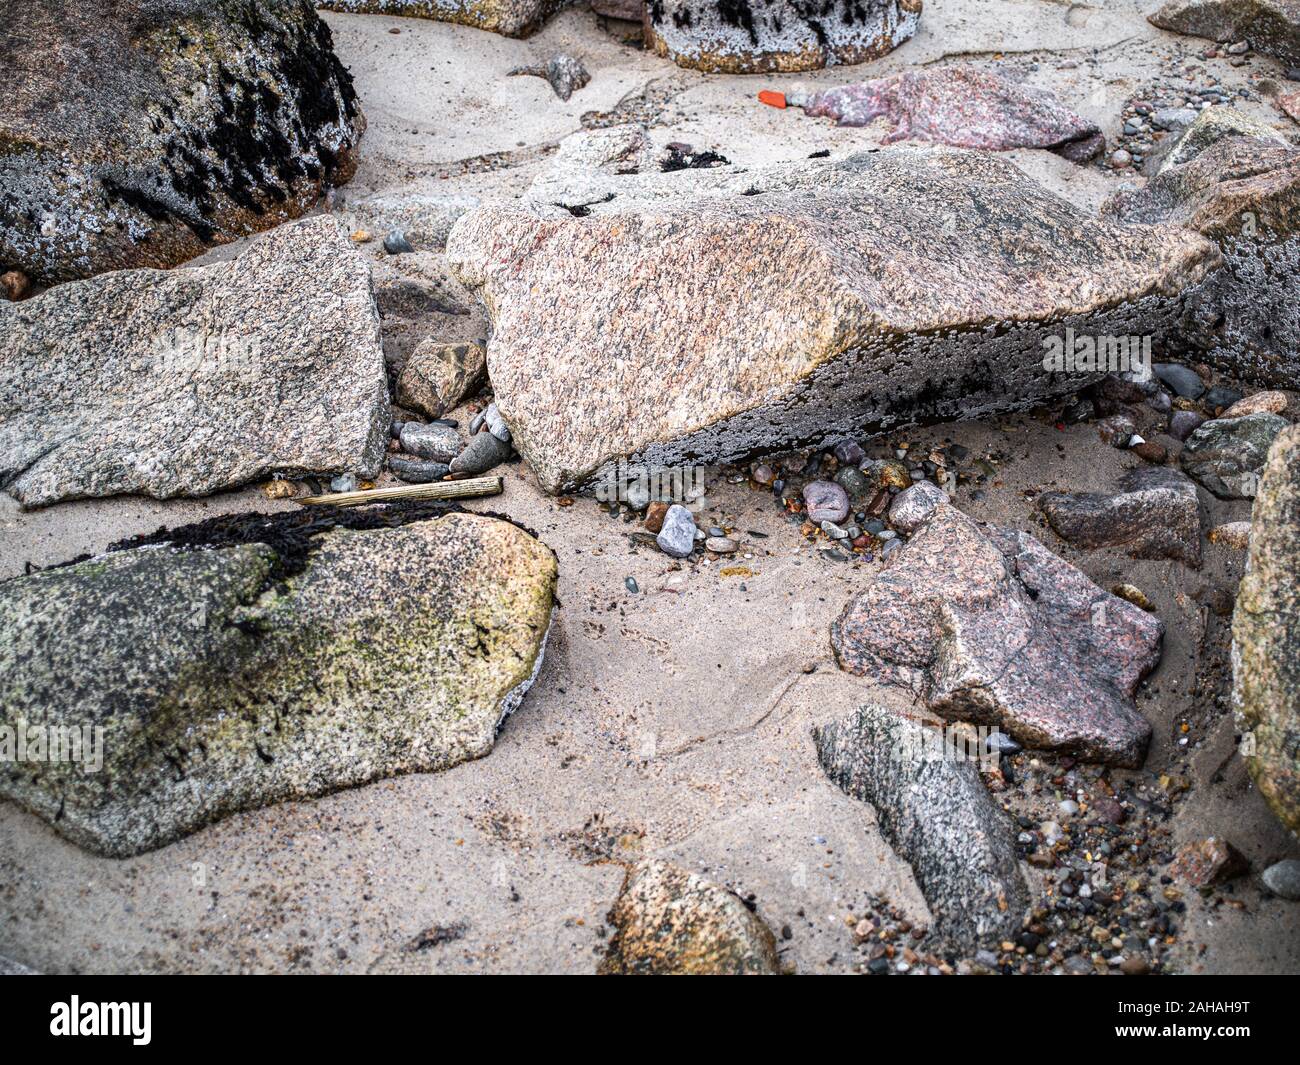 Closeup of dried out seaweed and stones that have been exposed at low tide. Stock Photo